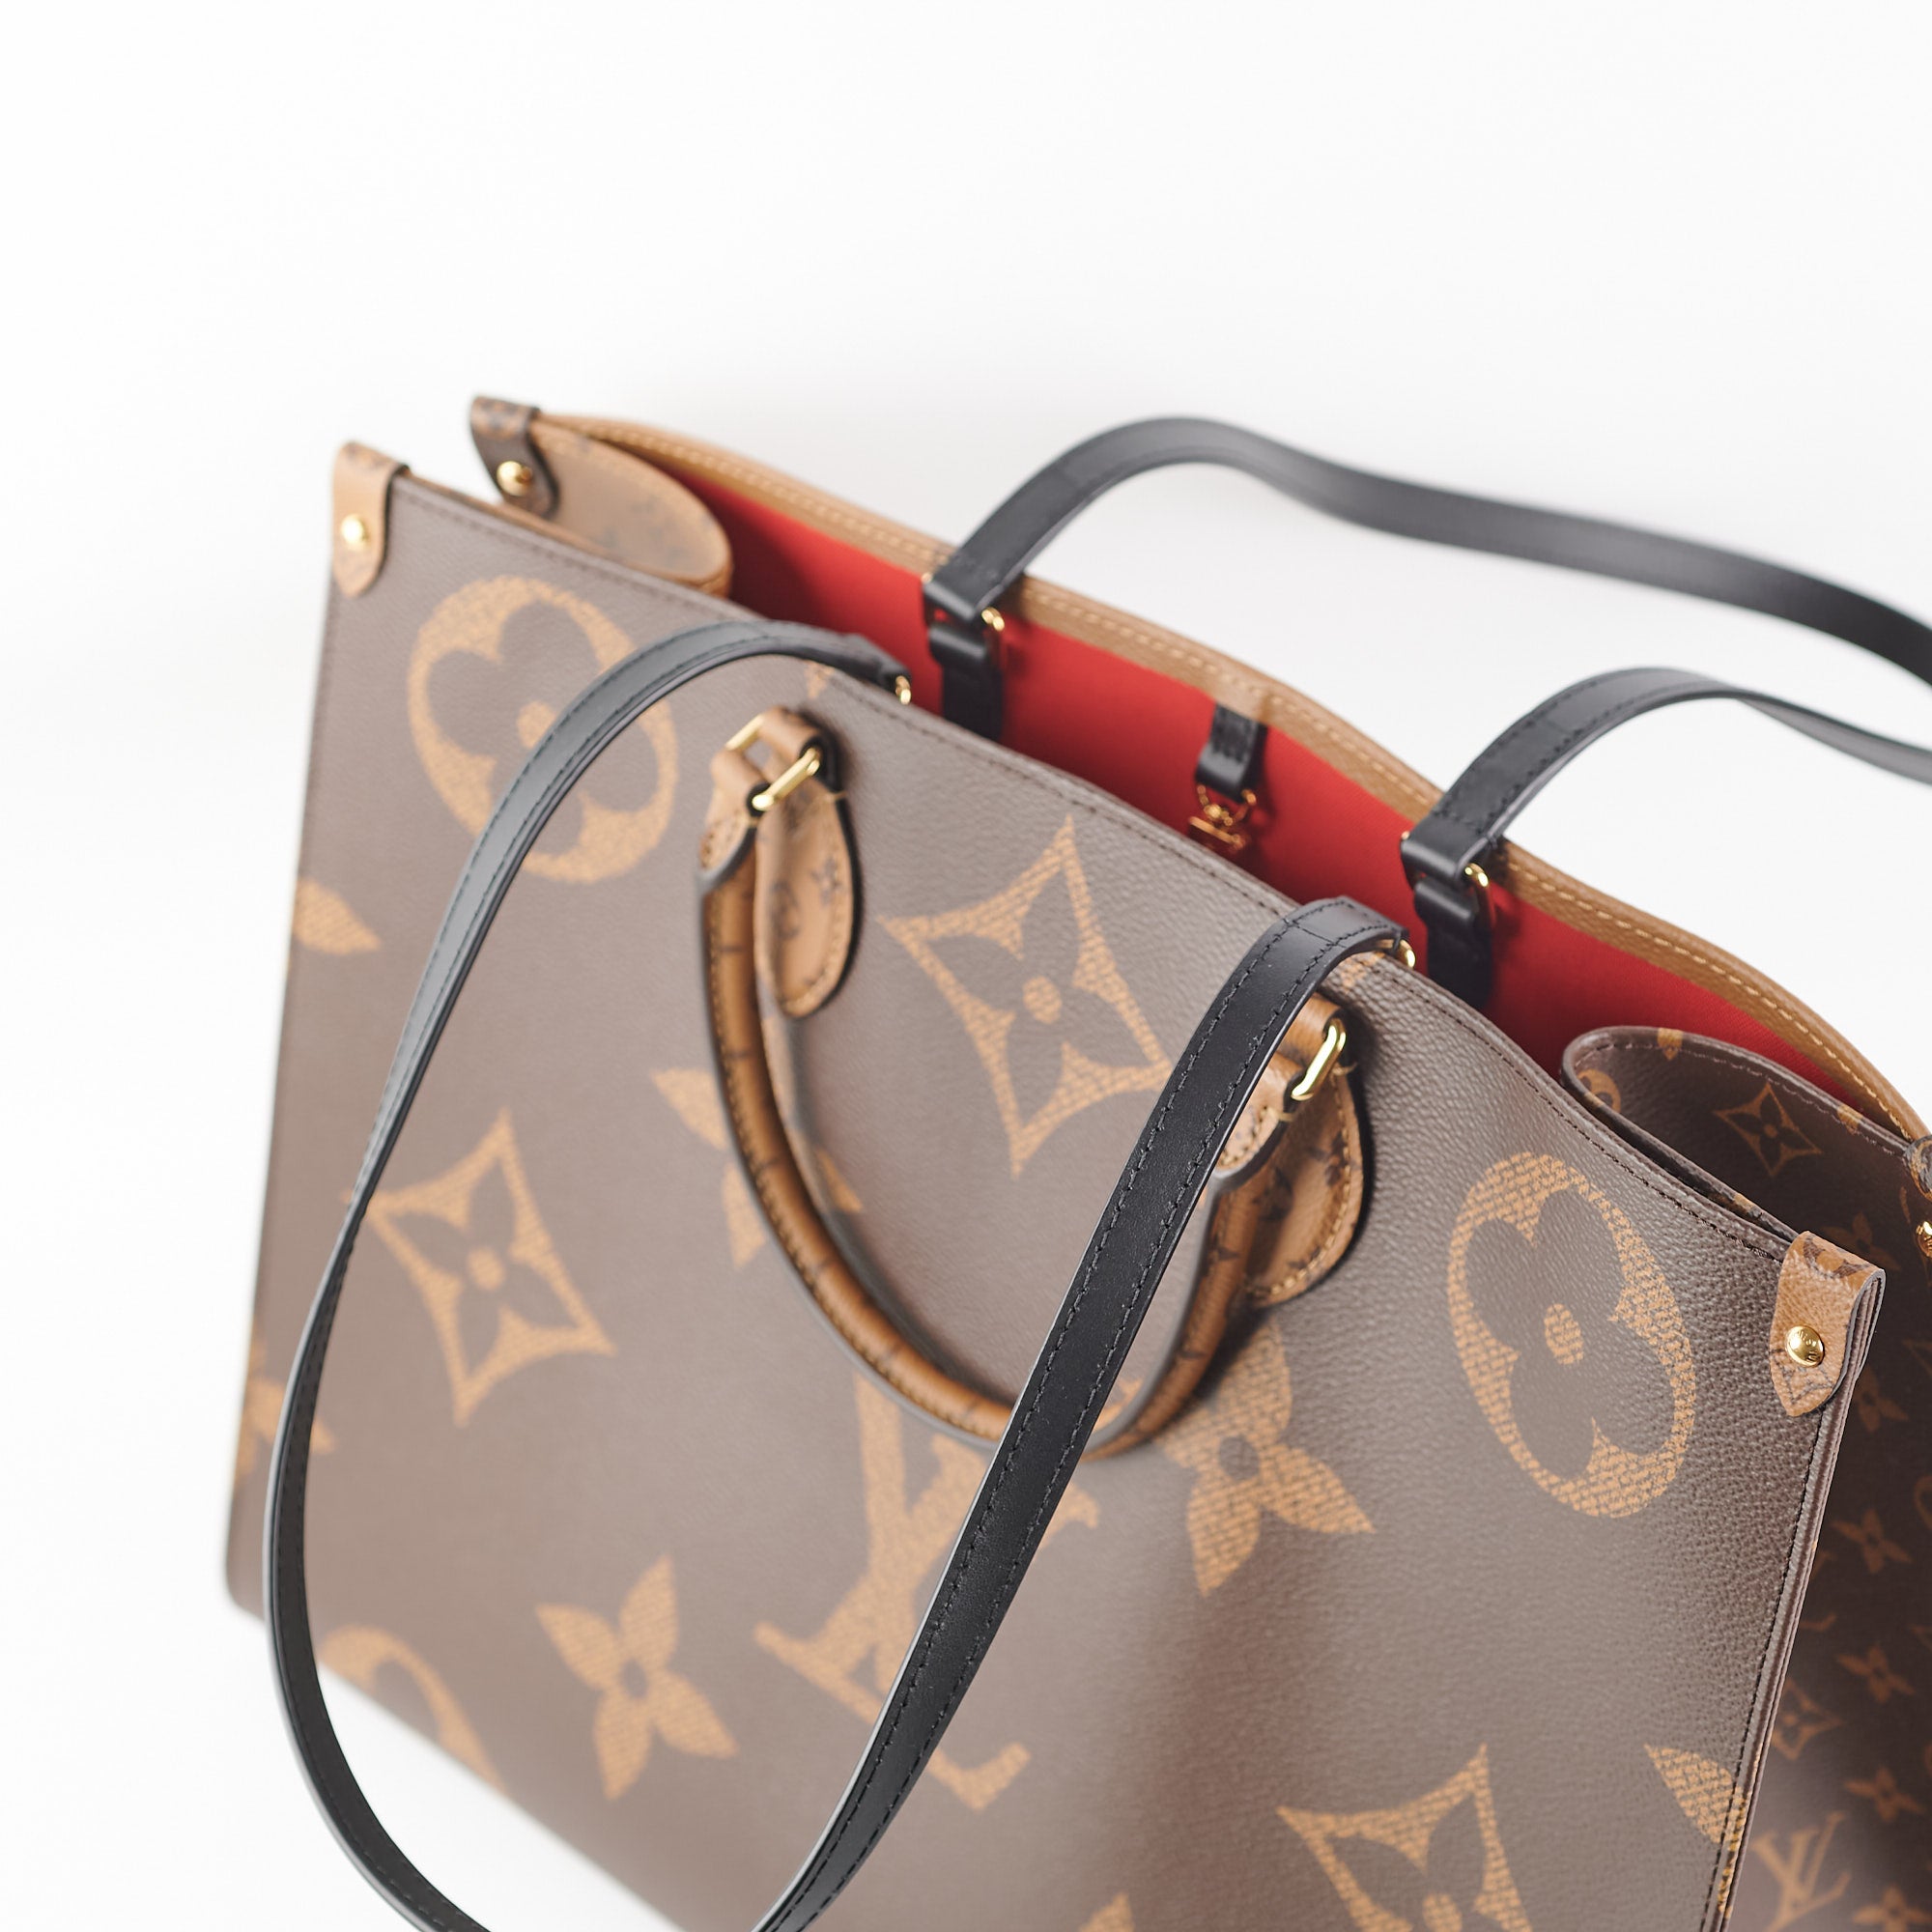 on the go louis vuitton tote